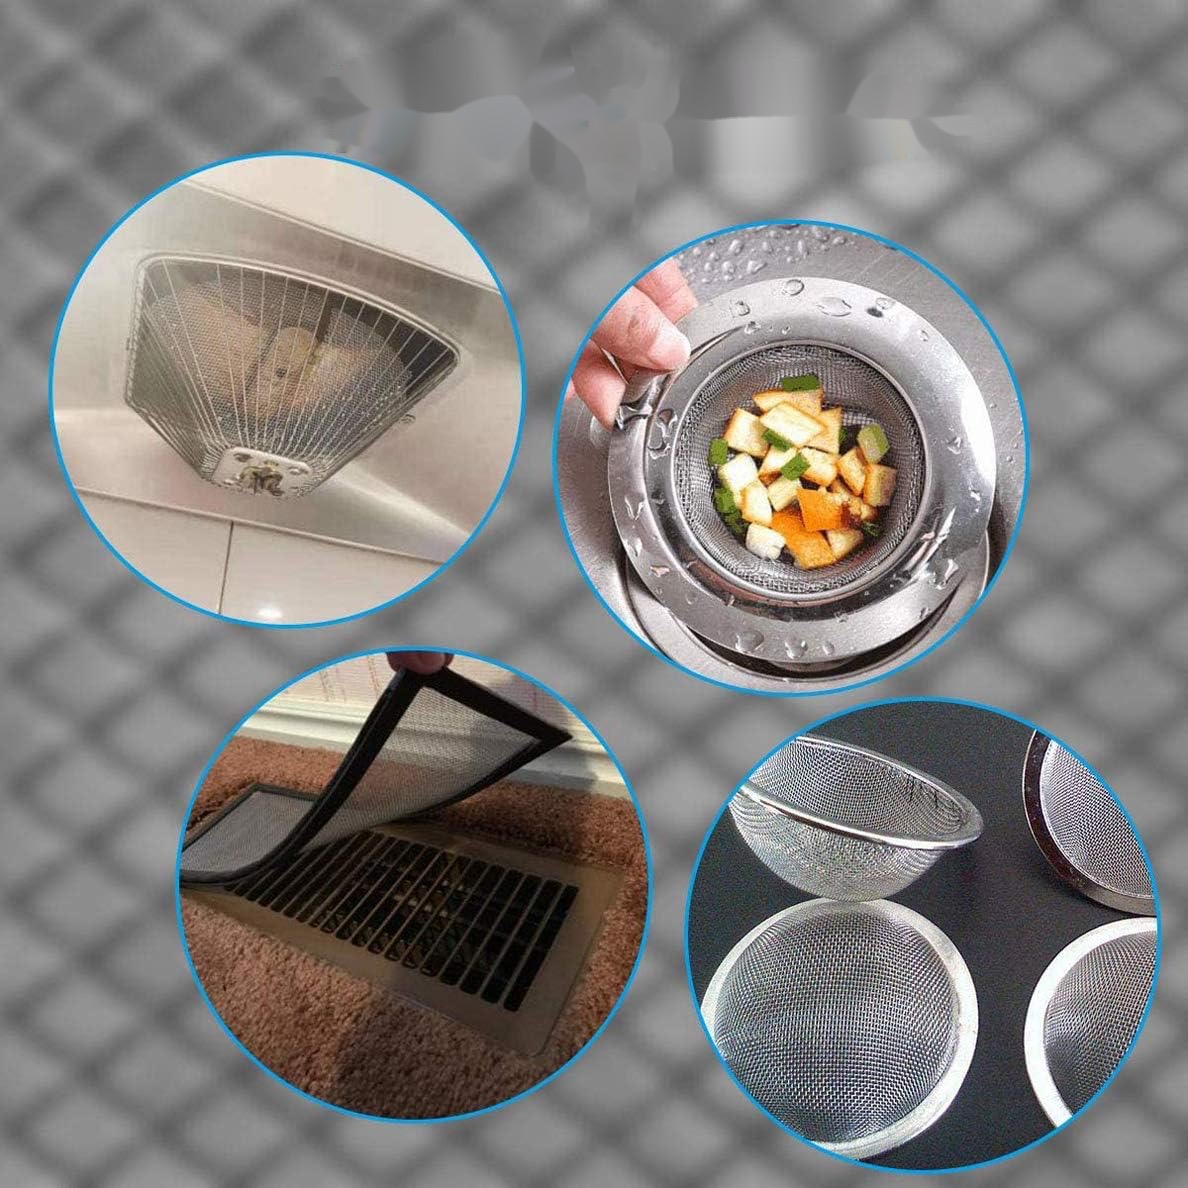 15 stainless steel wire netting multiple usage